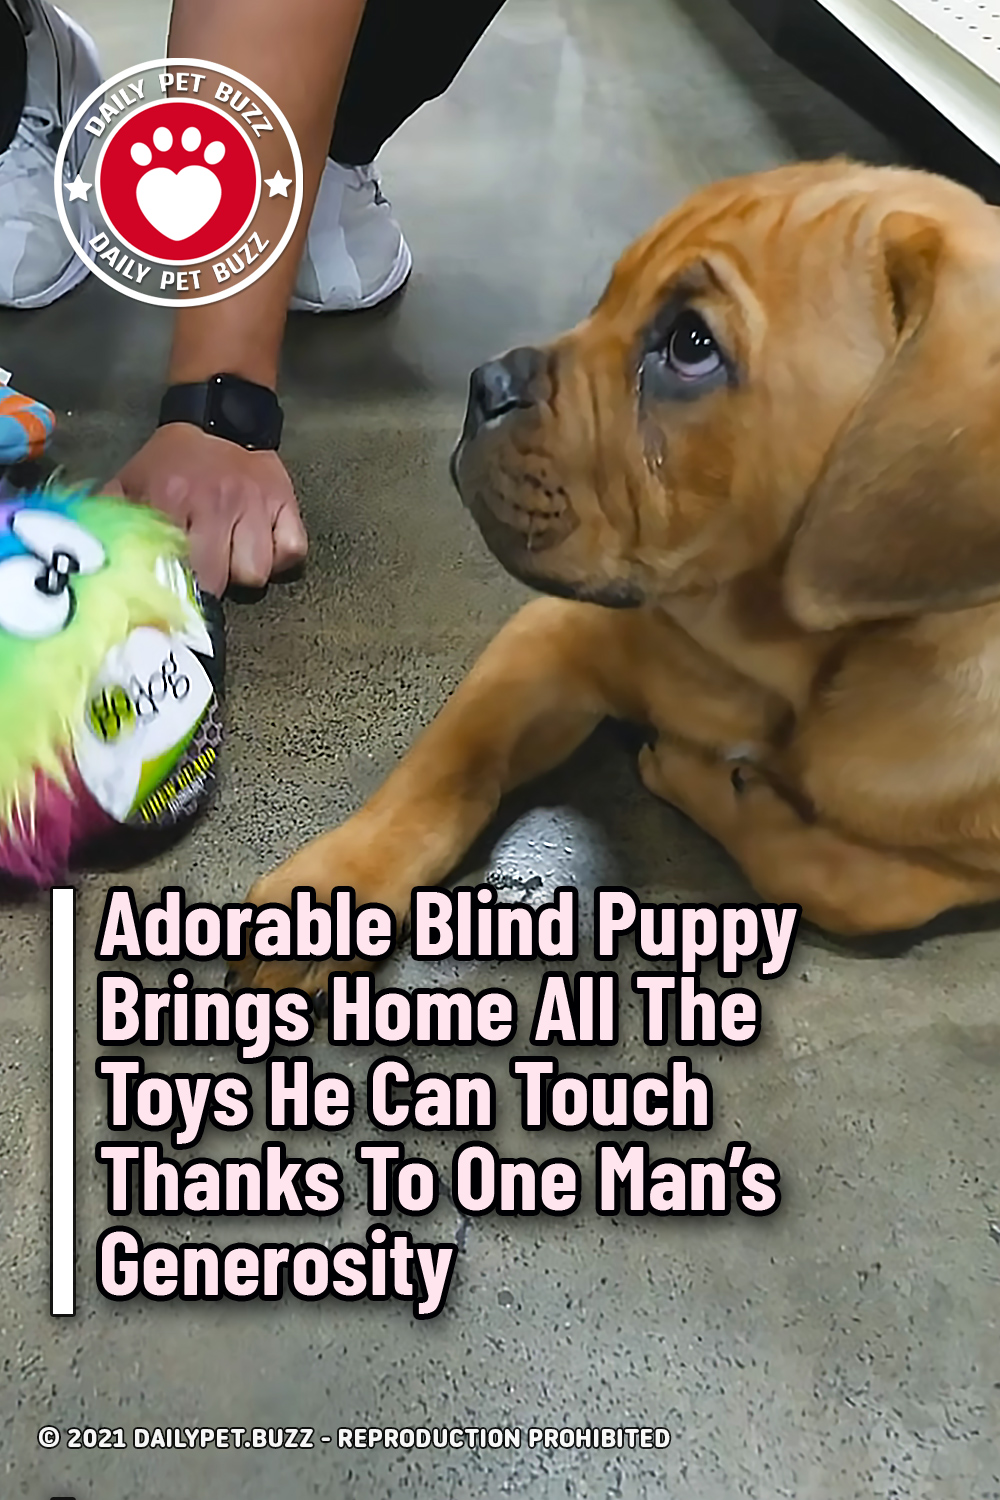 Adorable Blind Puppy Brings Home All The Toys He Can Touch Thanks To One Man’s Generosity